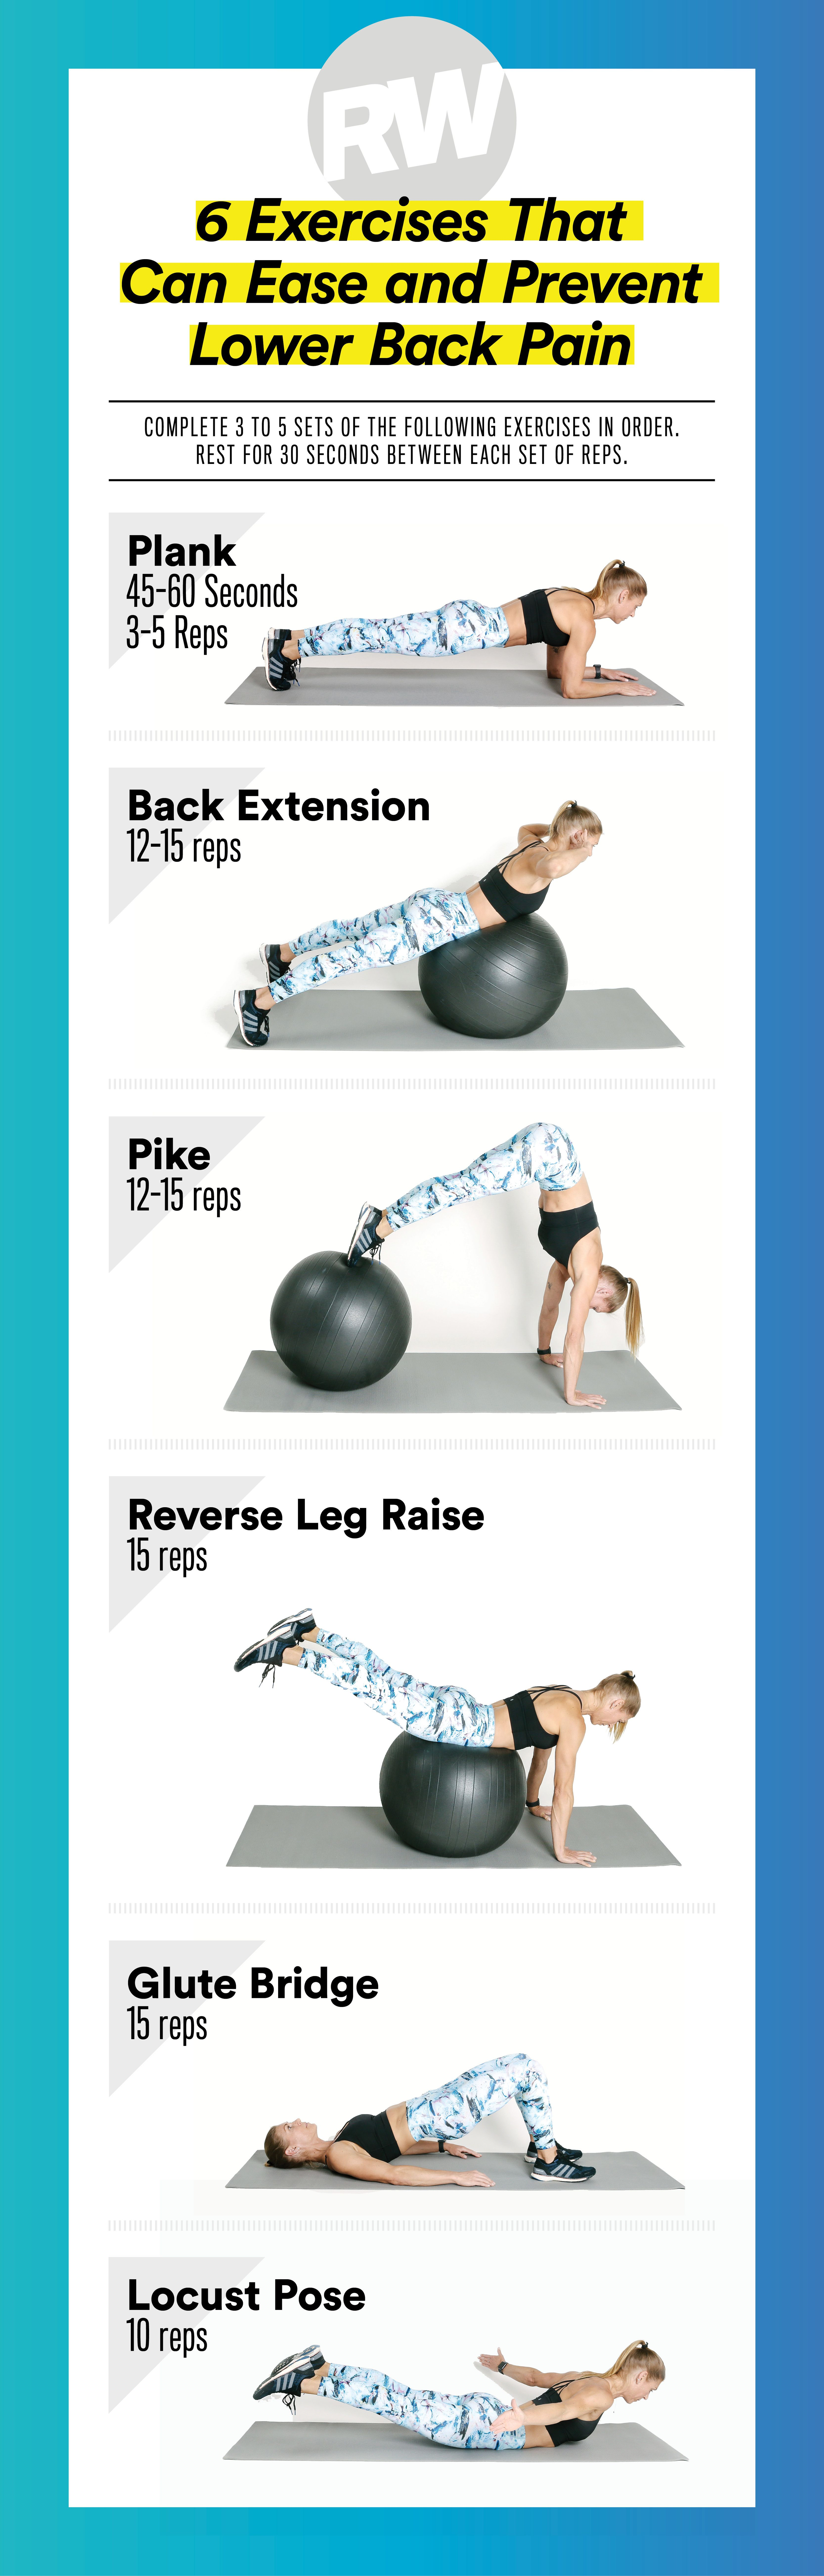 Exercises to prevent back pain